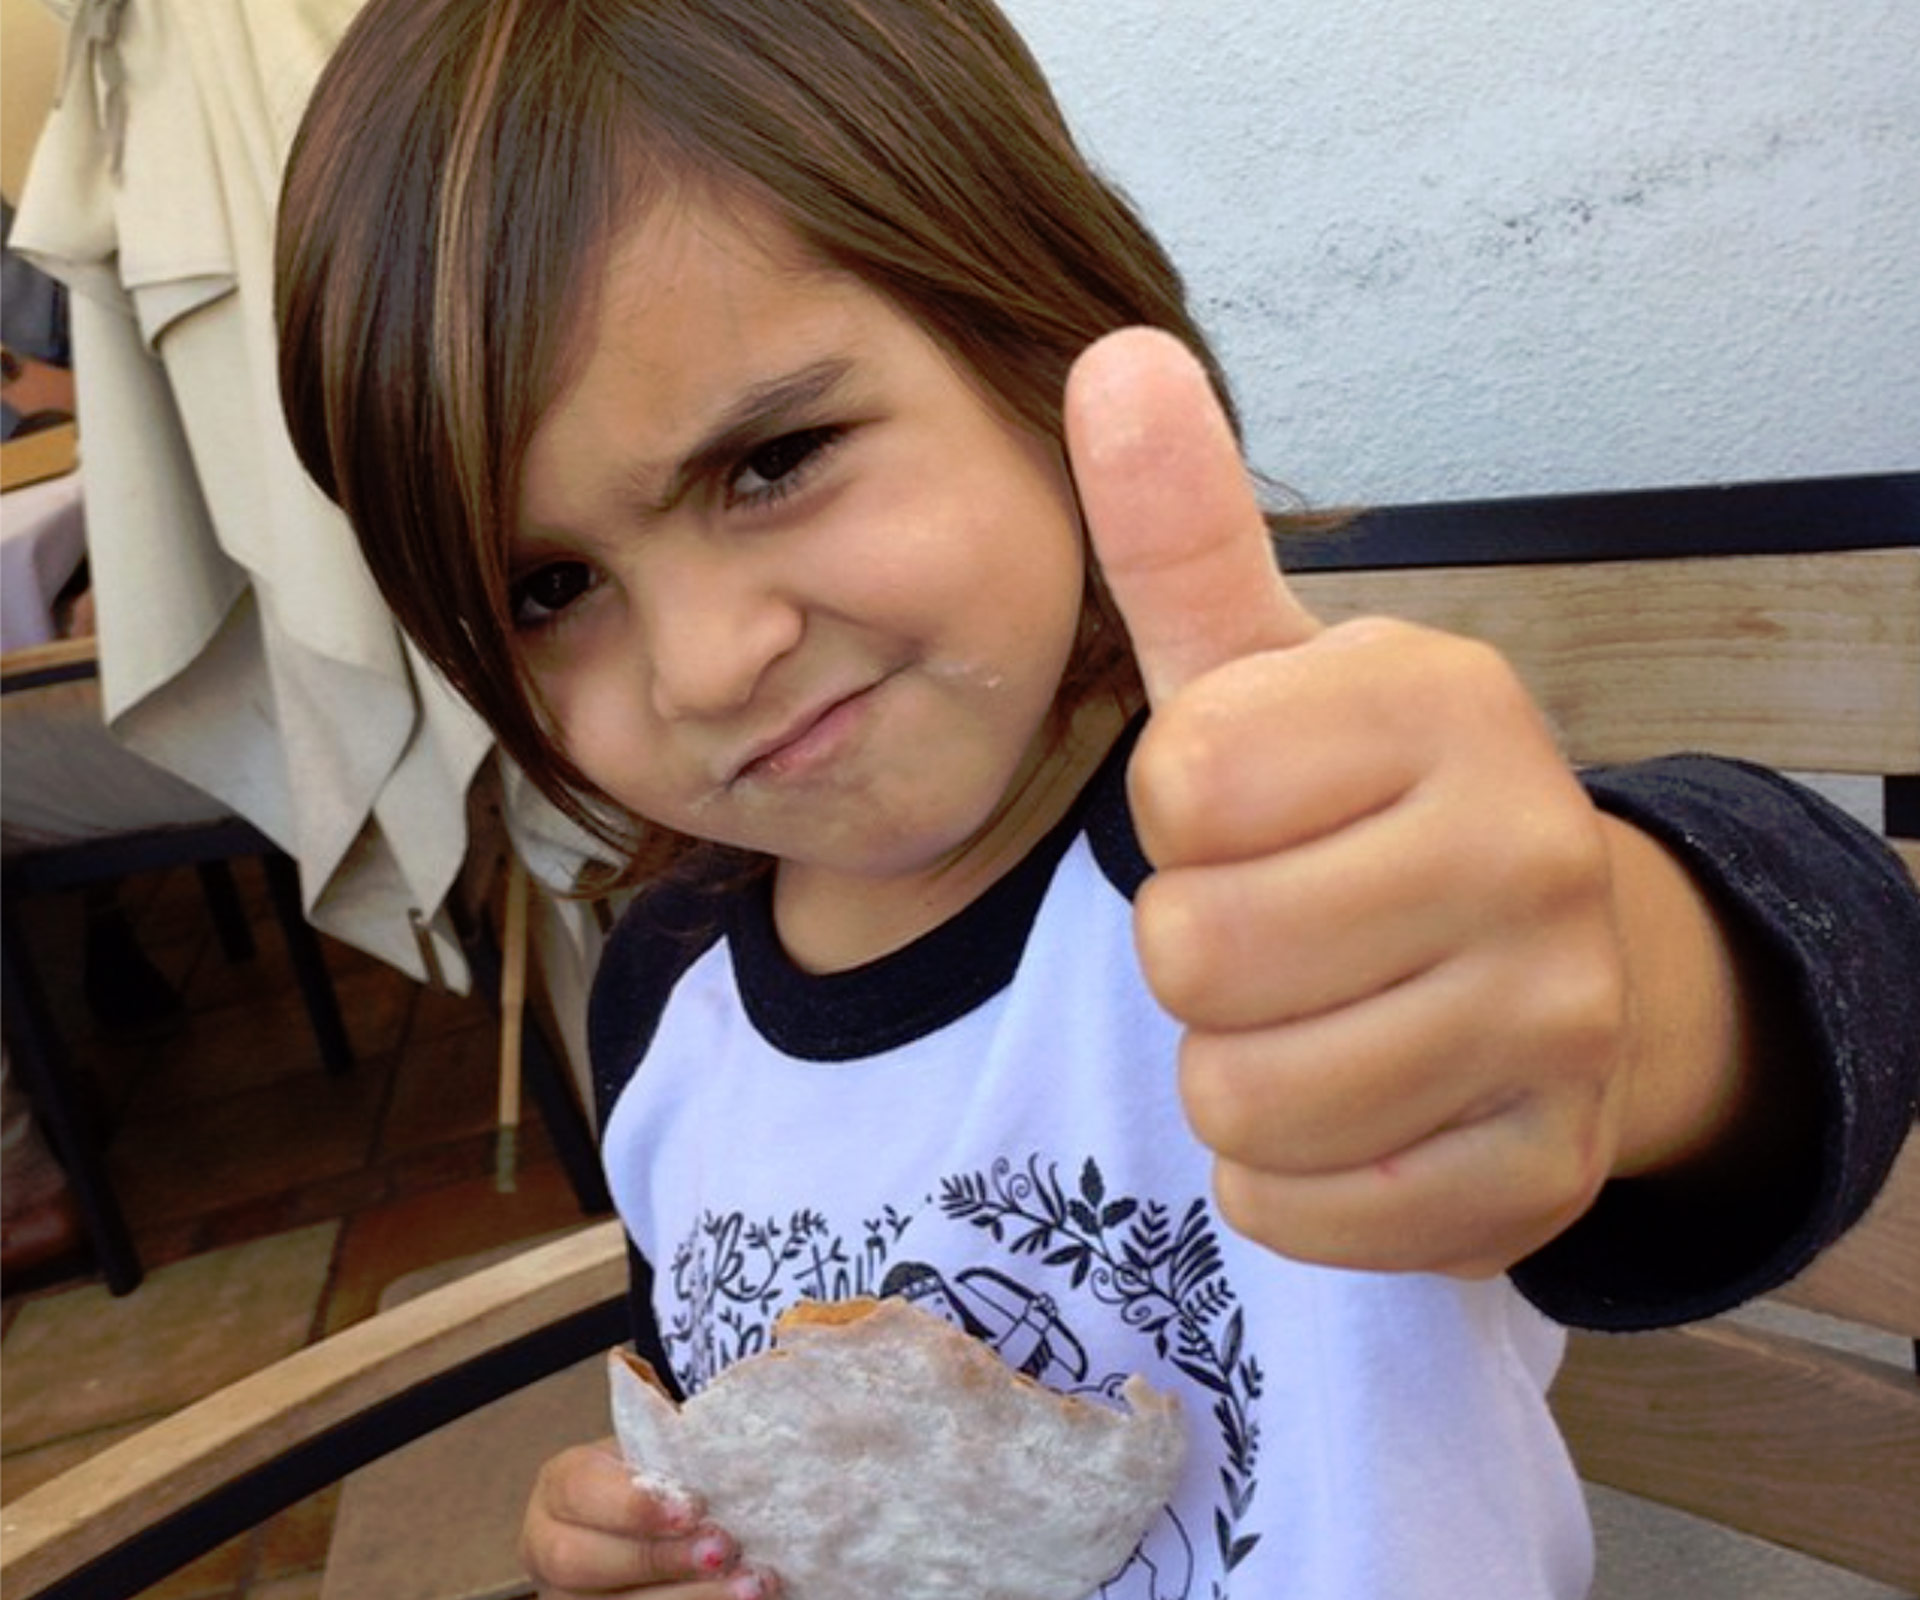 Mason and Reign Disick recreate “Charlie Bit My Finger” video